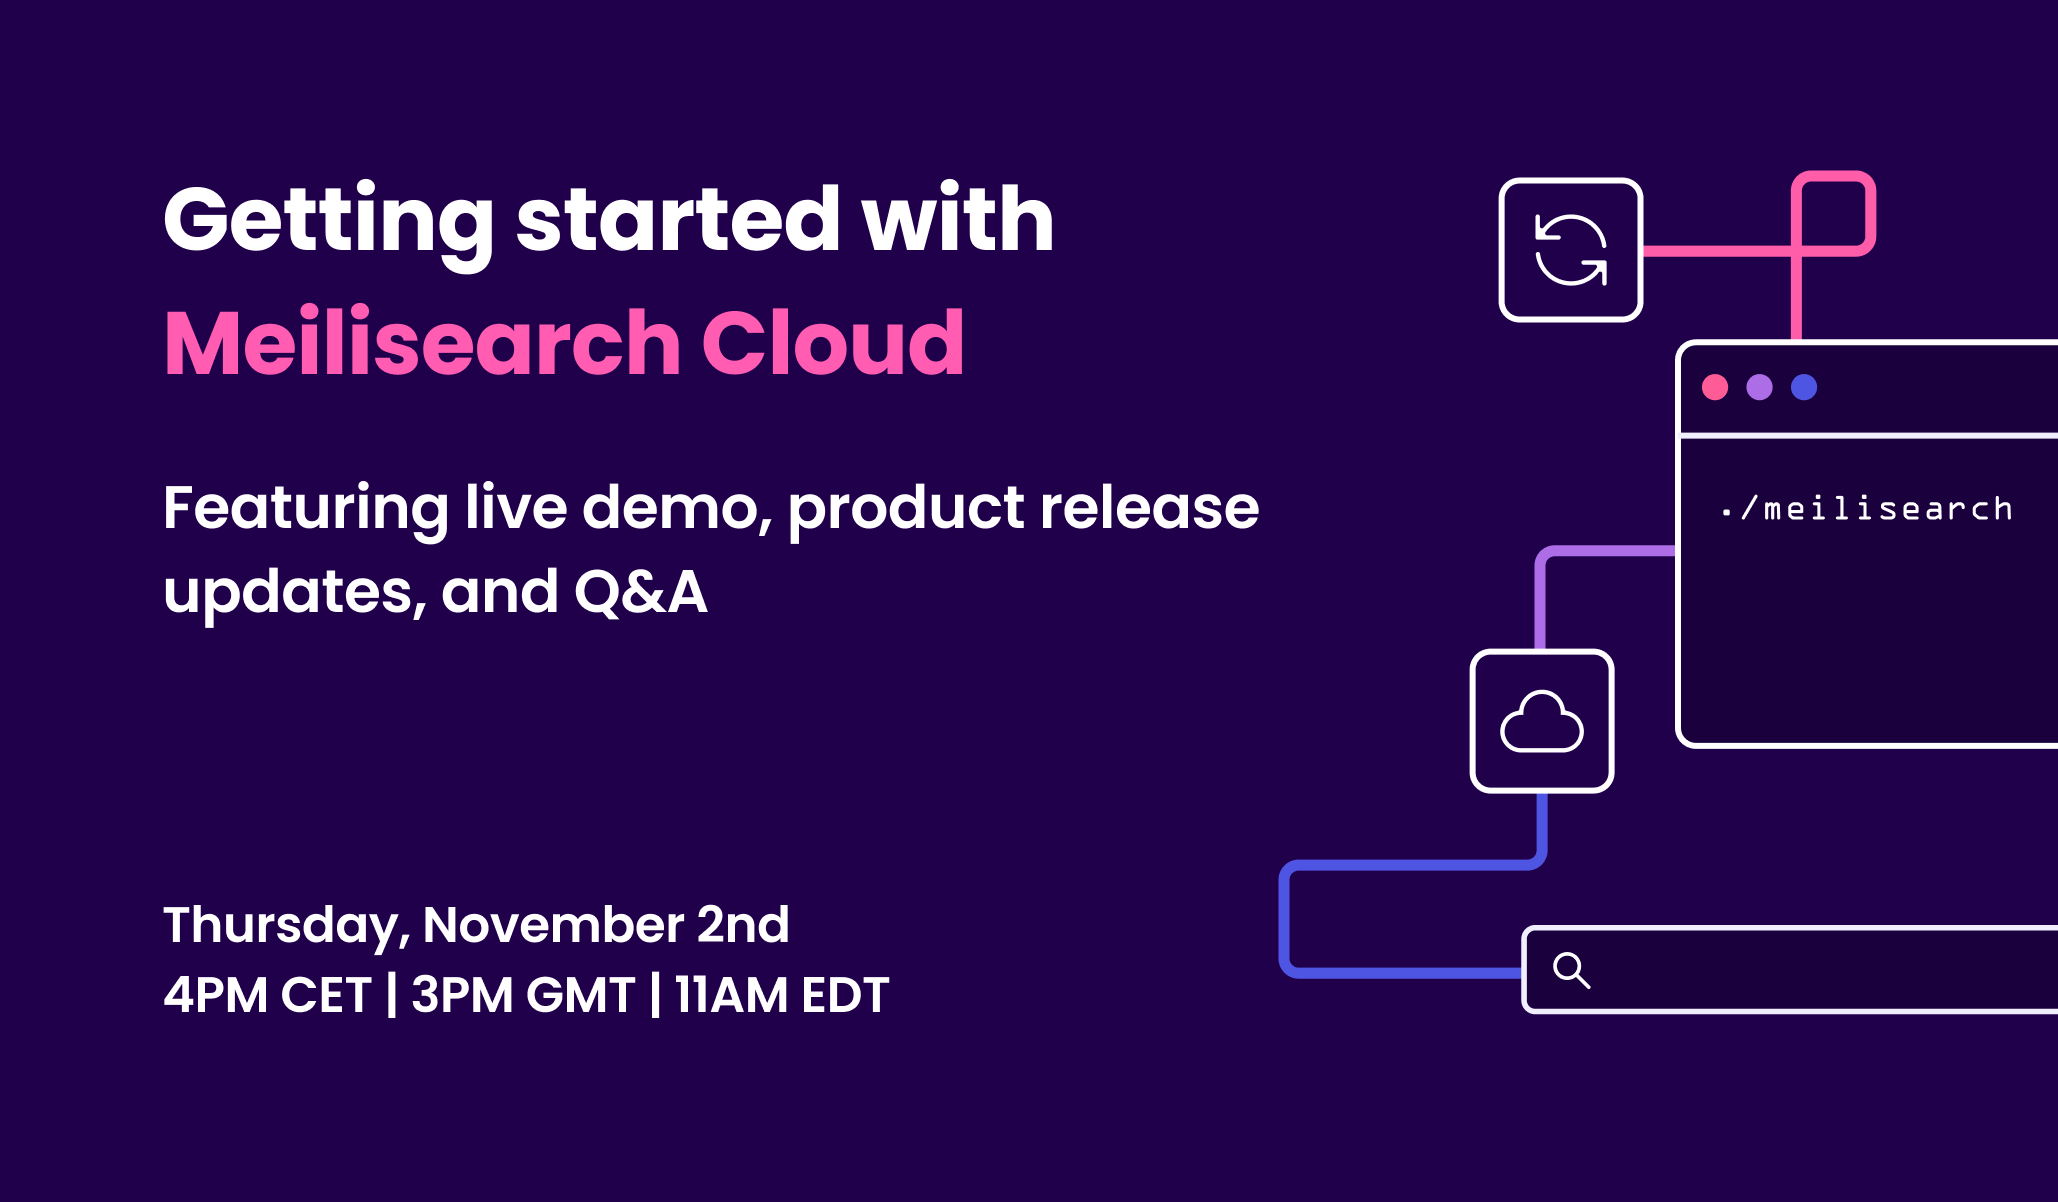 Getting started with Meilisearch Cloud. Featuring live demo, product release updates, and Q&A. Thursday, Novemeber 2nd. 4PM CET, 3PM GMT, 11AM EDT